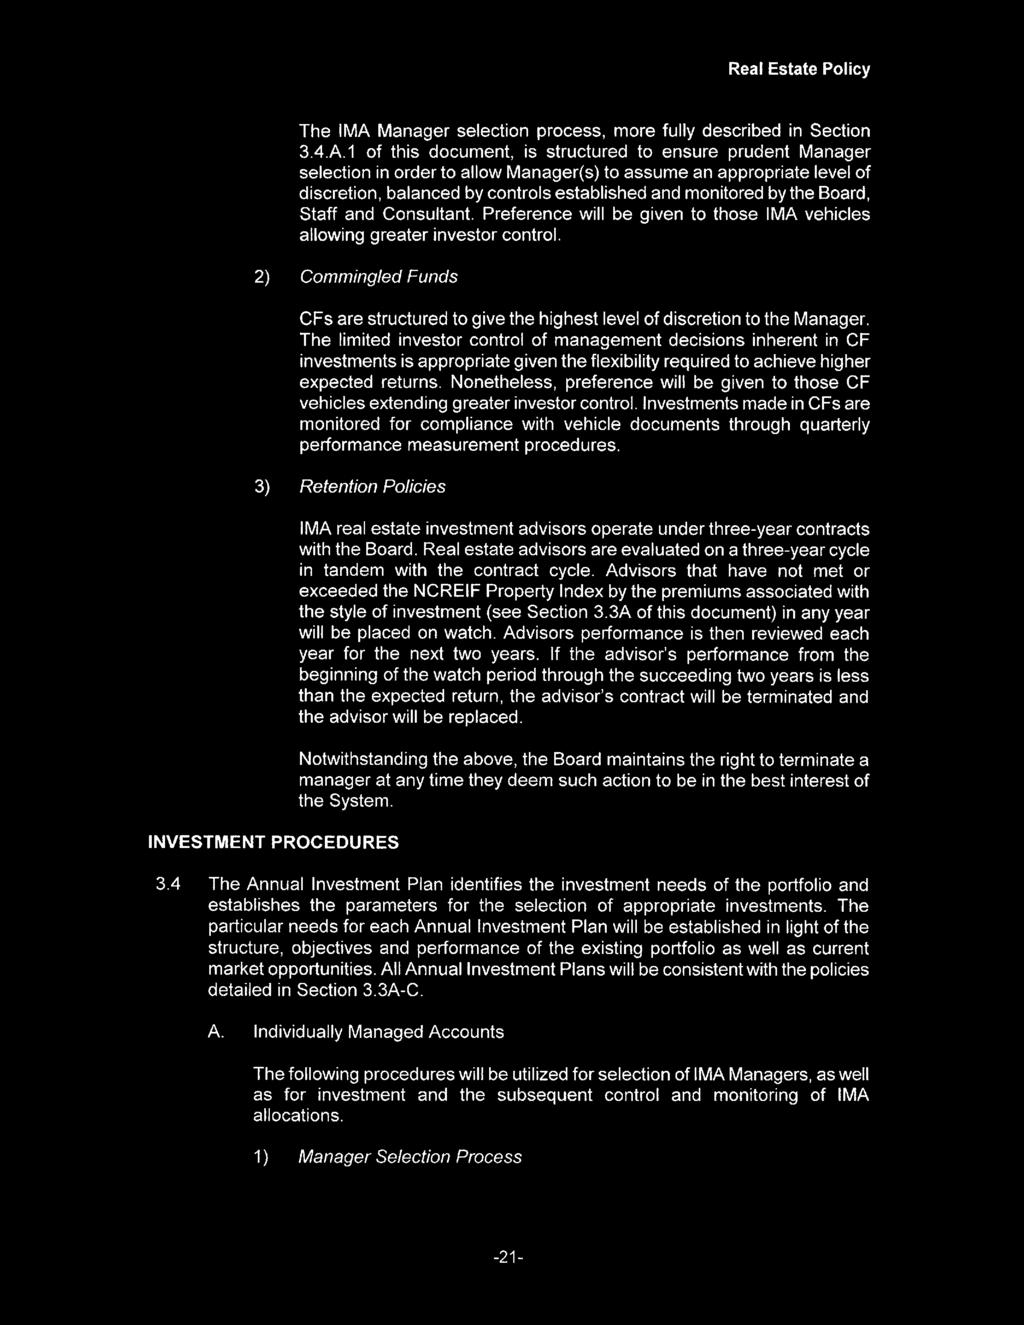 1 of this document, is structured to ensure prudent Manager selection in order to allow Manager(s) to assume an appropriate level of discretion, balanced by controls established and monitored by the